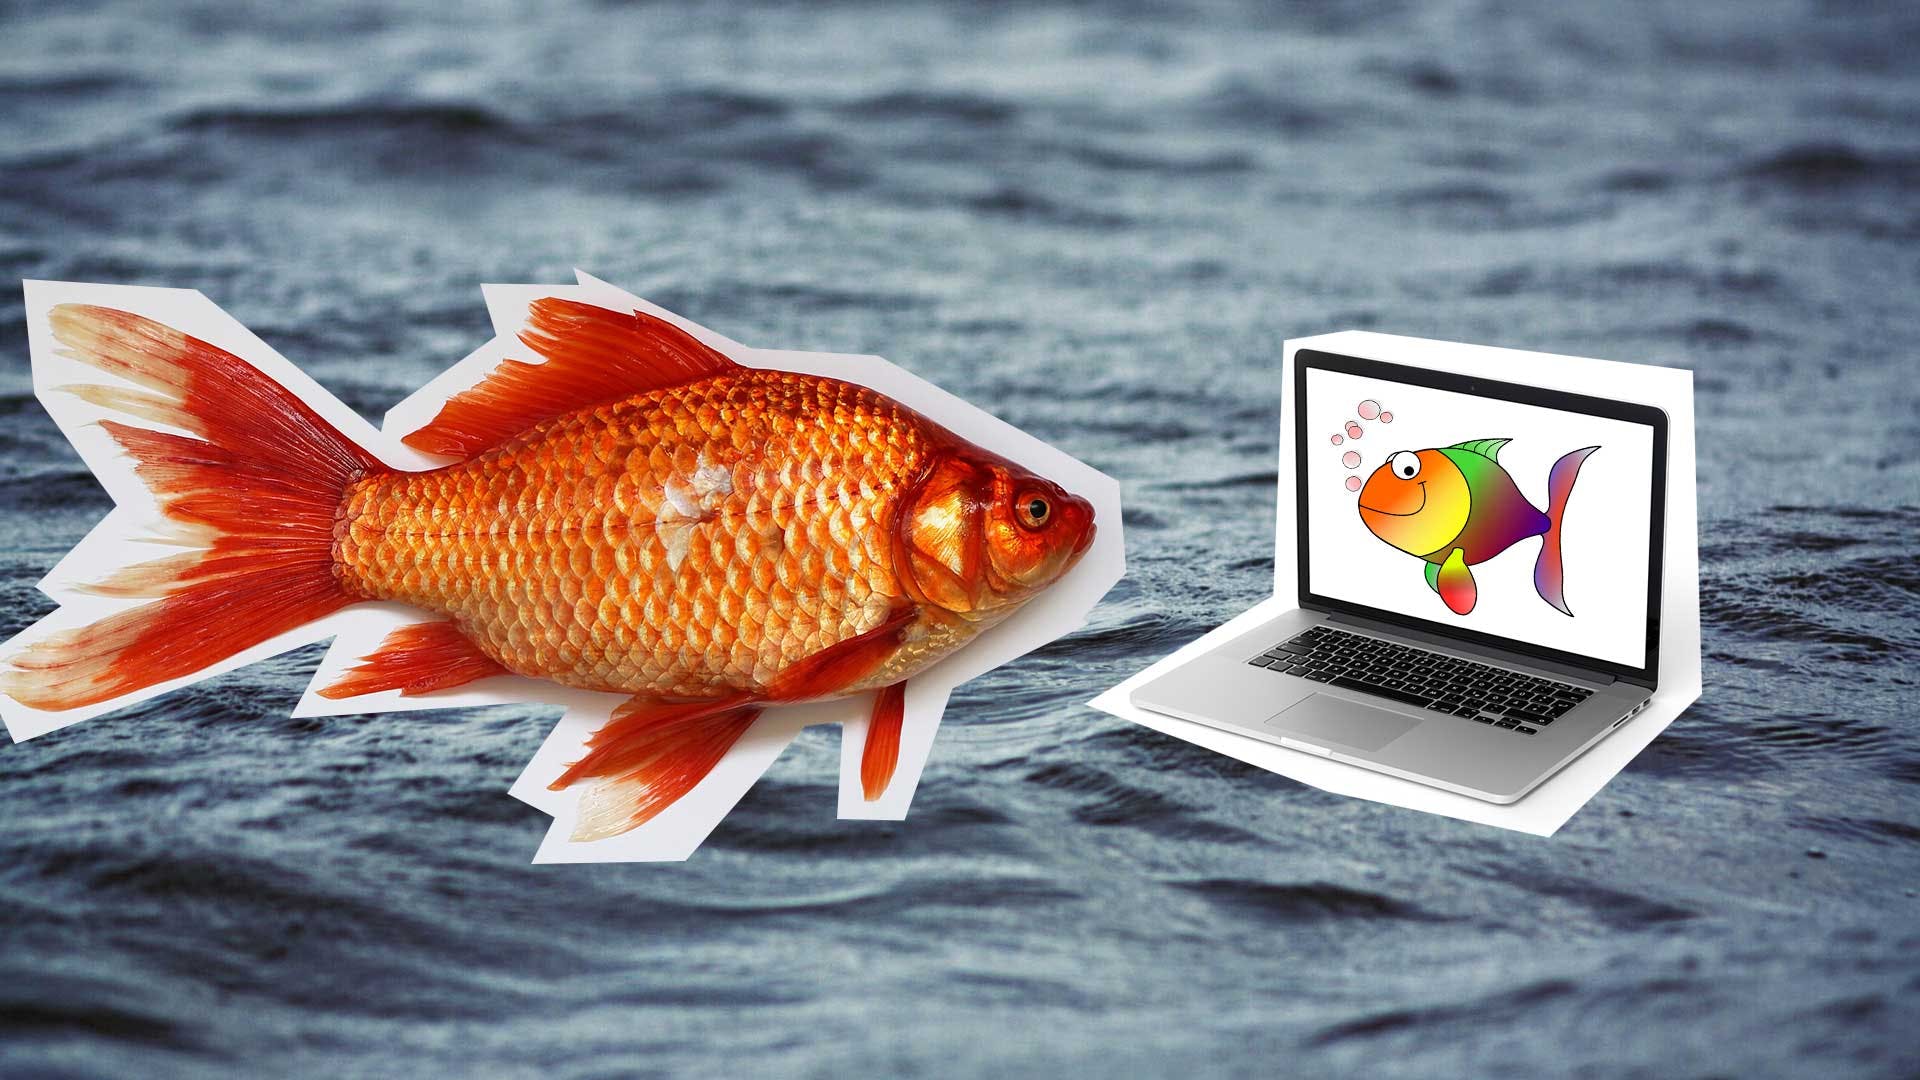 A goldfish looking at a laptop with a picture of rainbow fish on it